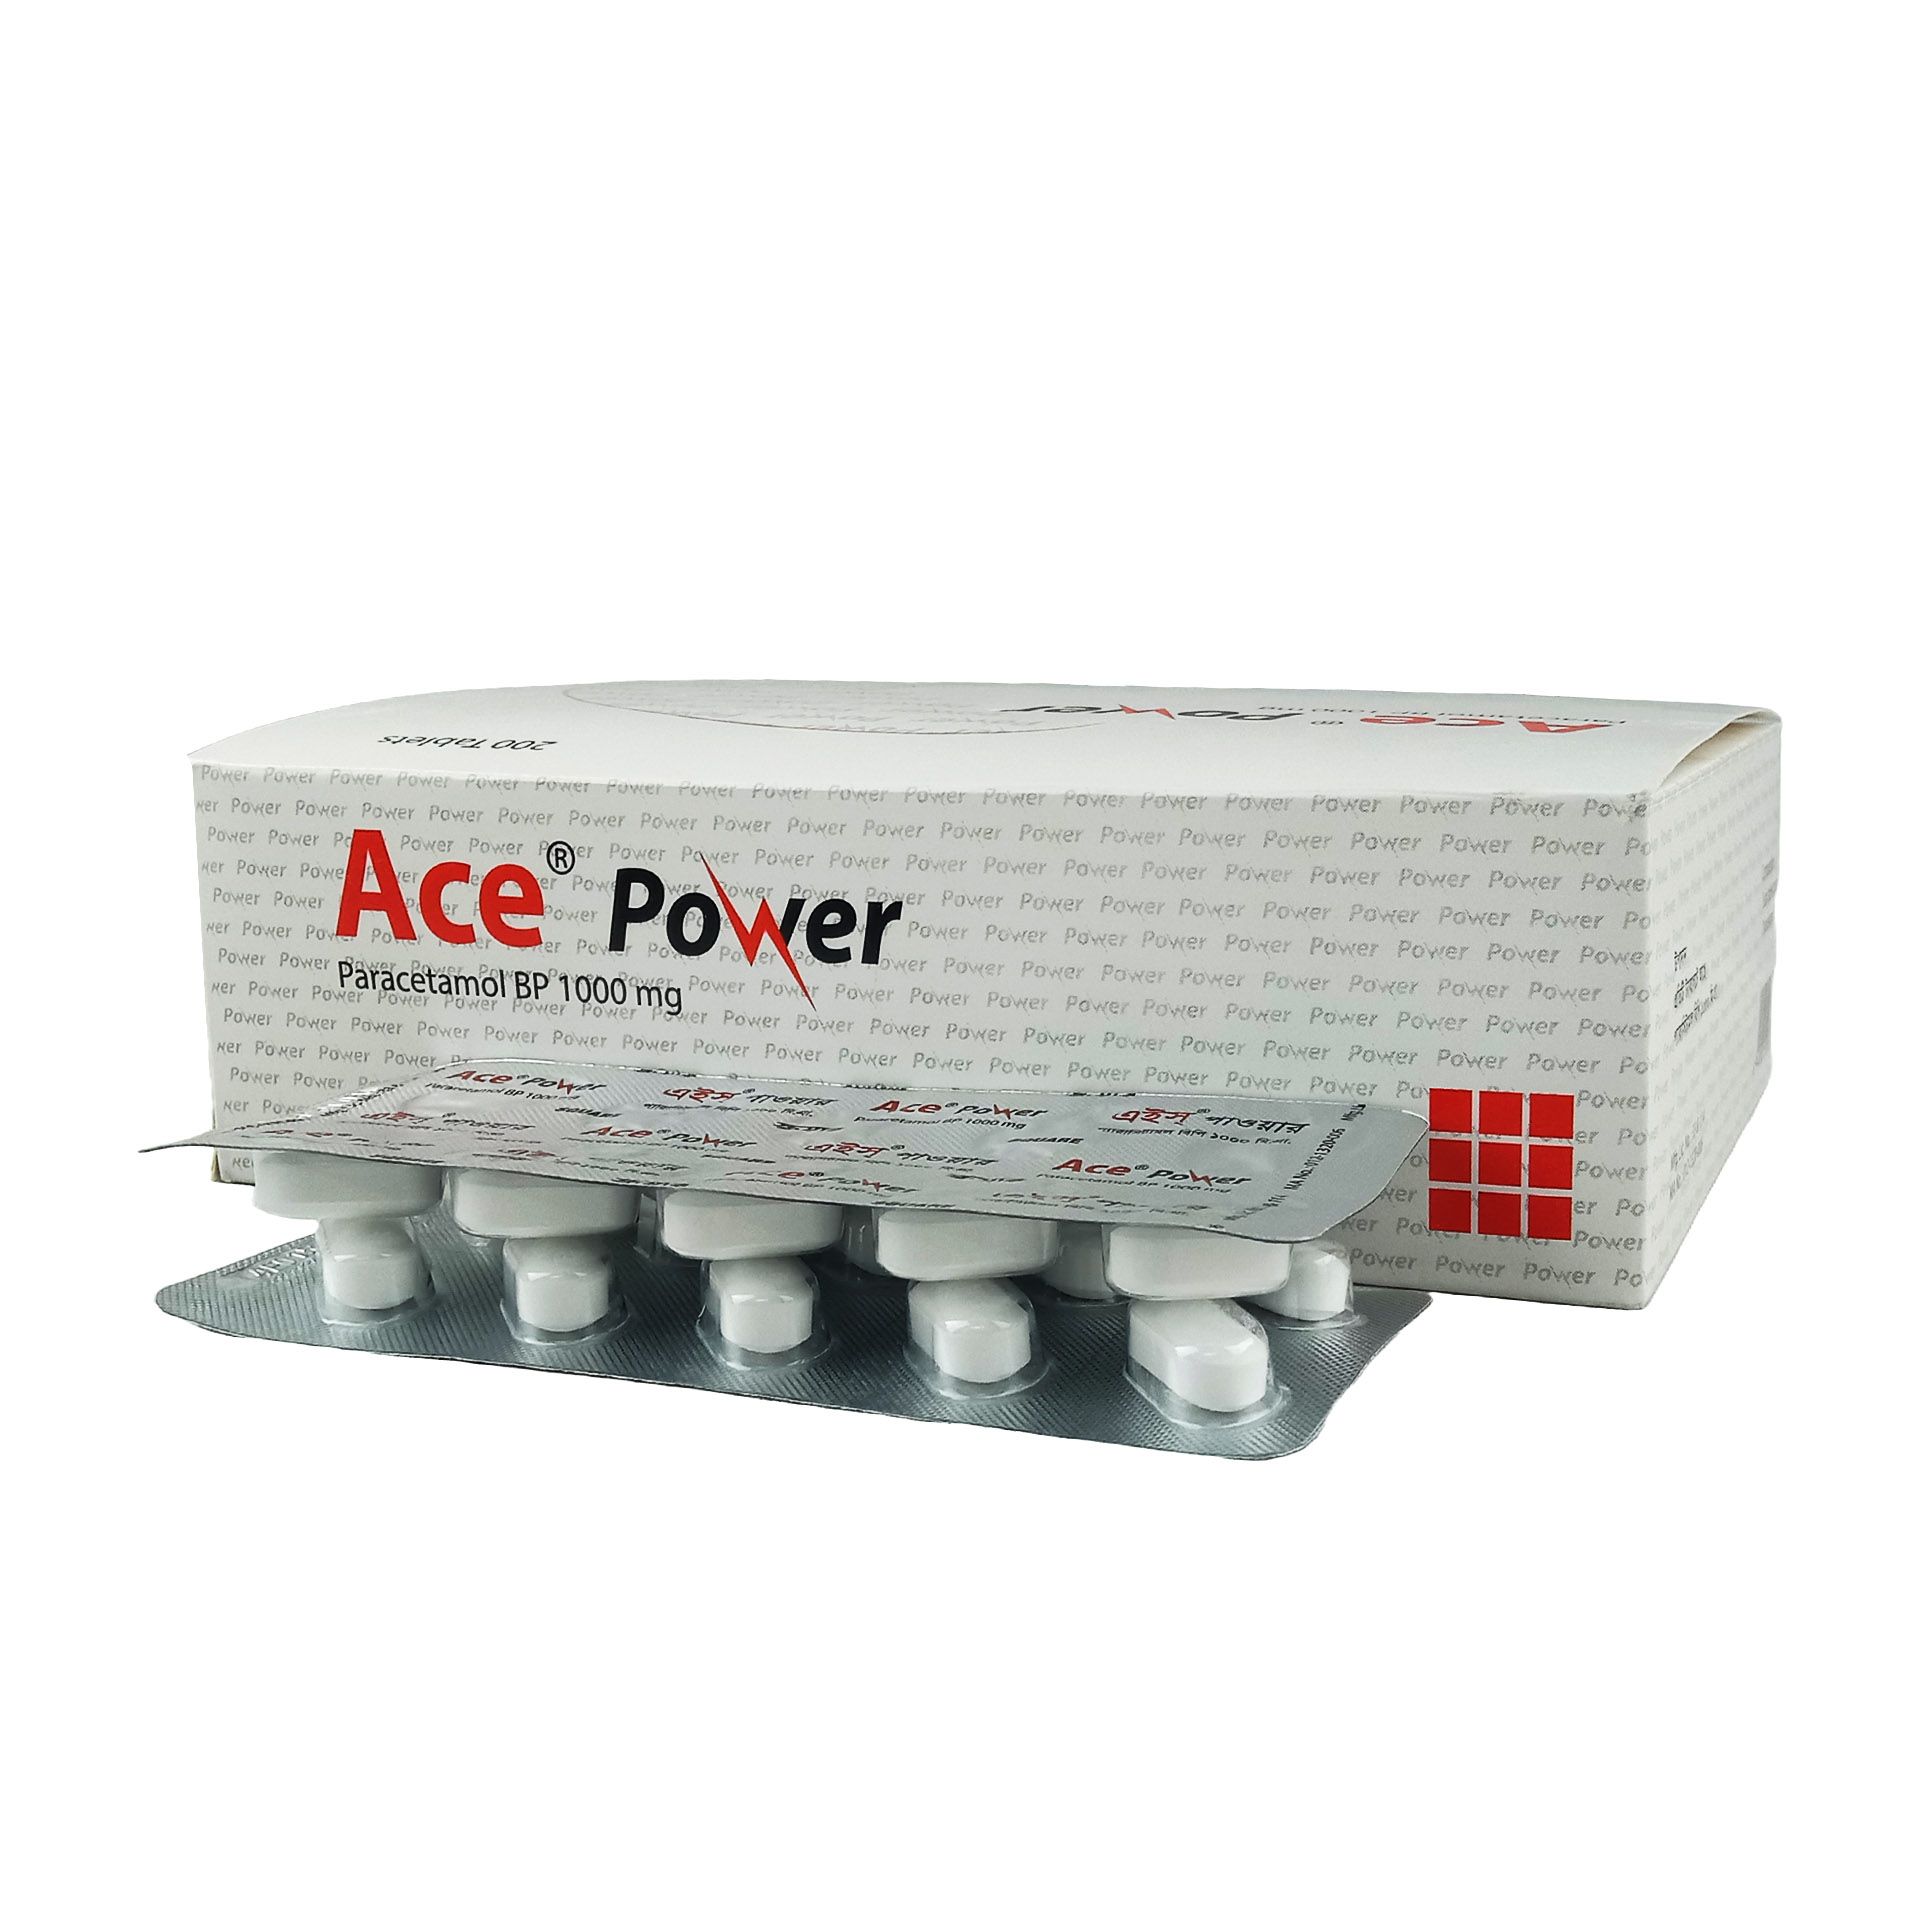 Ace Power 1000mg Tablet